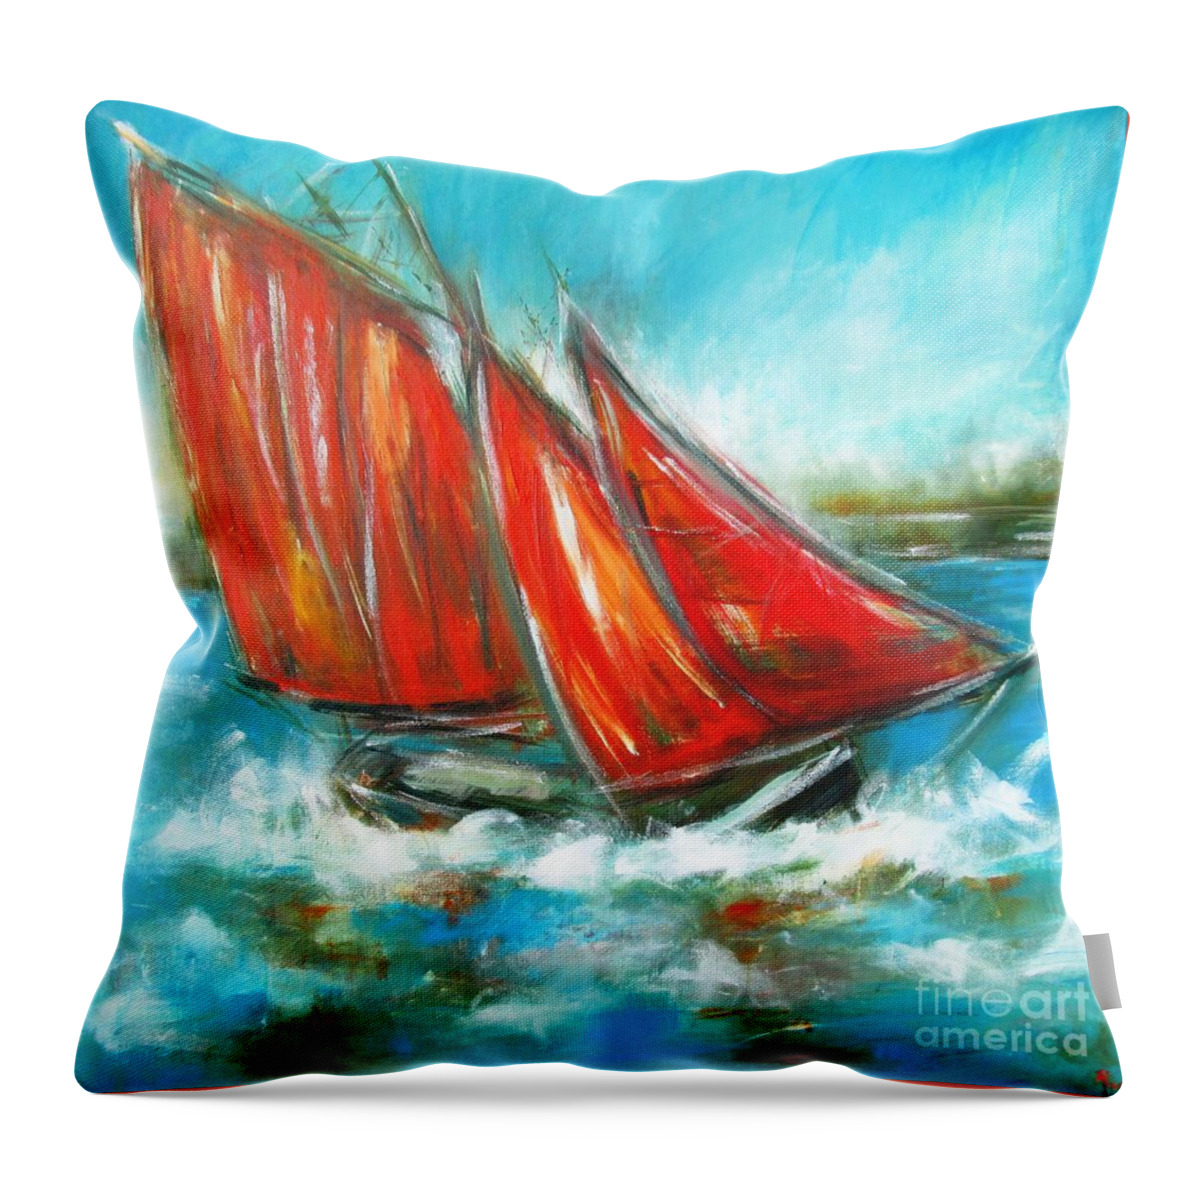 Galway Hooker Throw Pillow featuring the painting Paintings of Galway hooker on galway bay - see www.pxi-art.com by Mary Cahalan Lee - aka PIXI